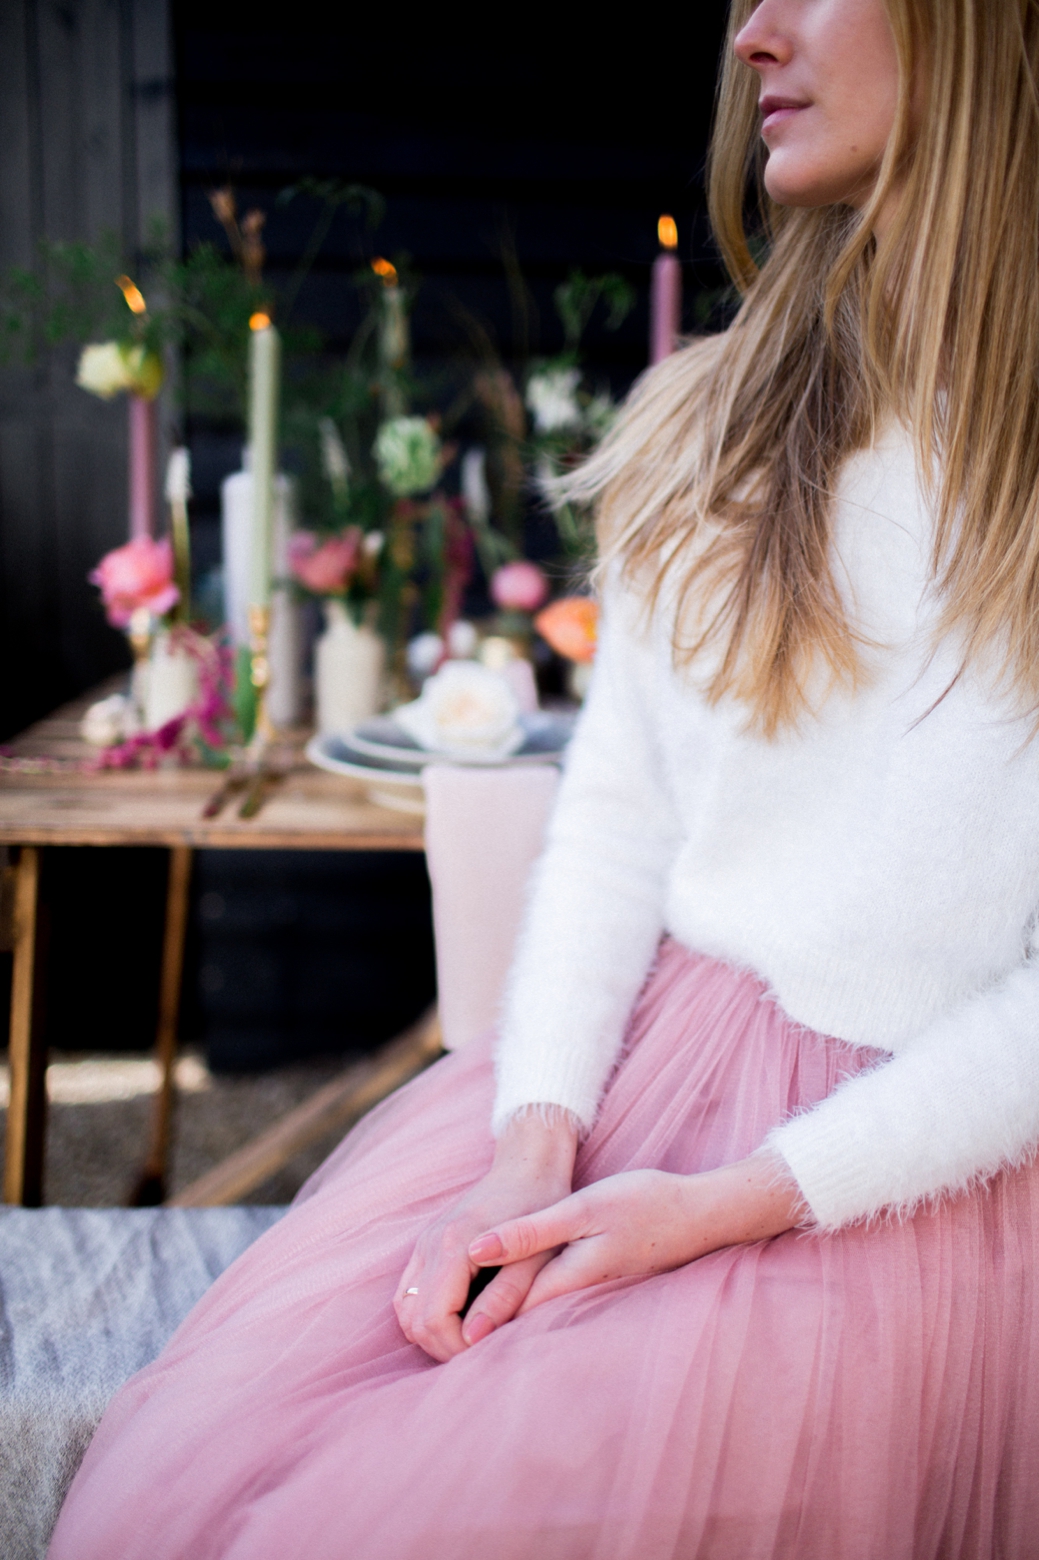 The first bridal look was with a pink maxi skirt and a white angora sweater, which is a sweet and girlish casual combo